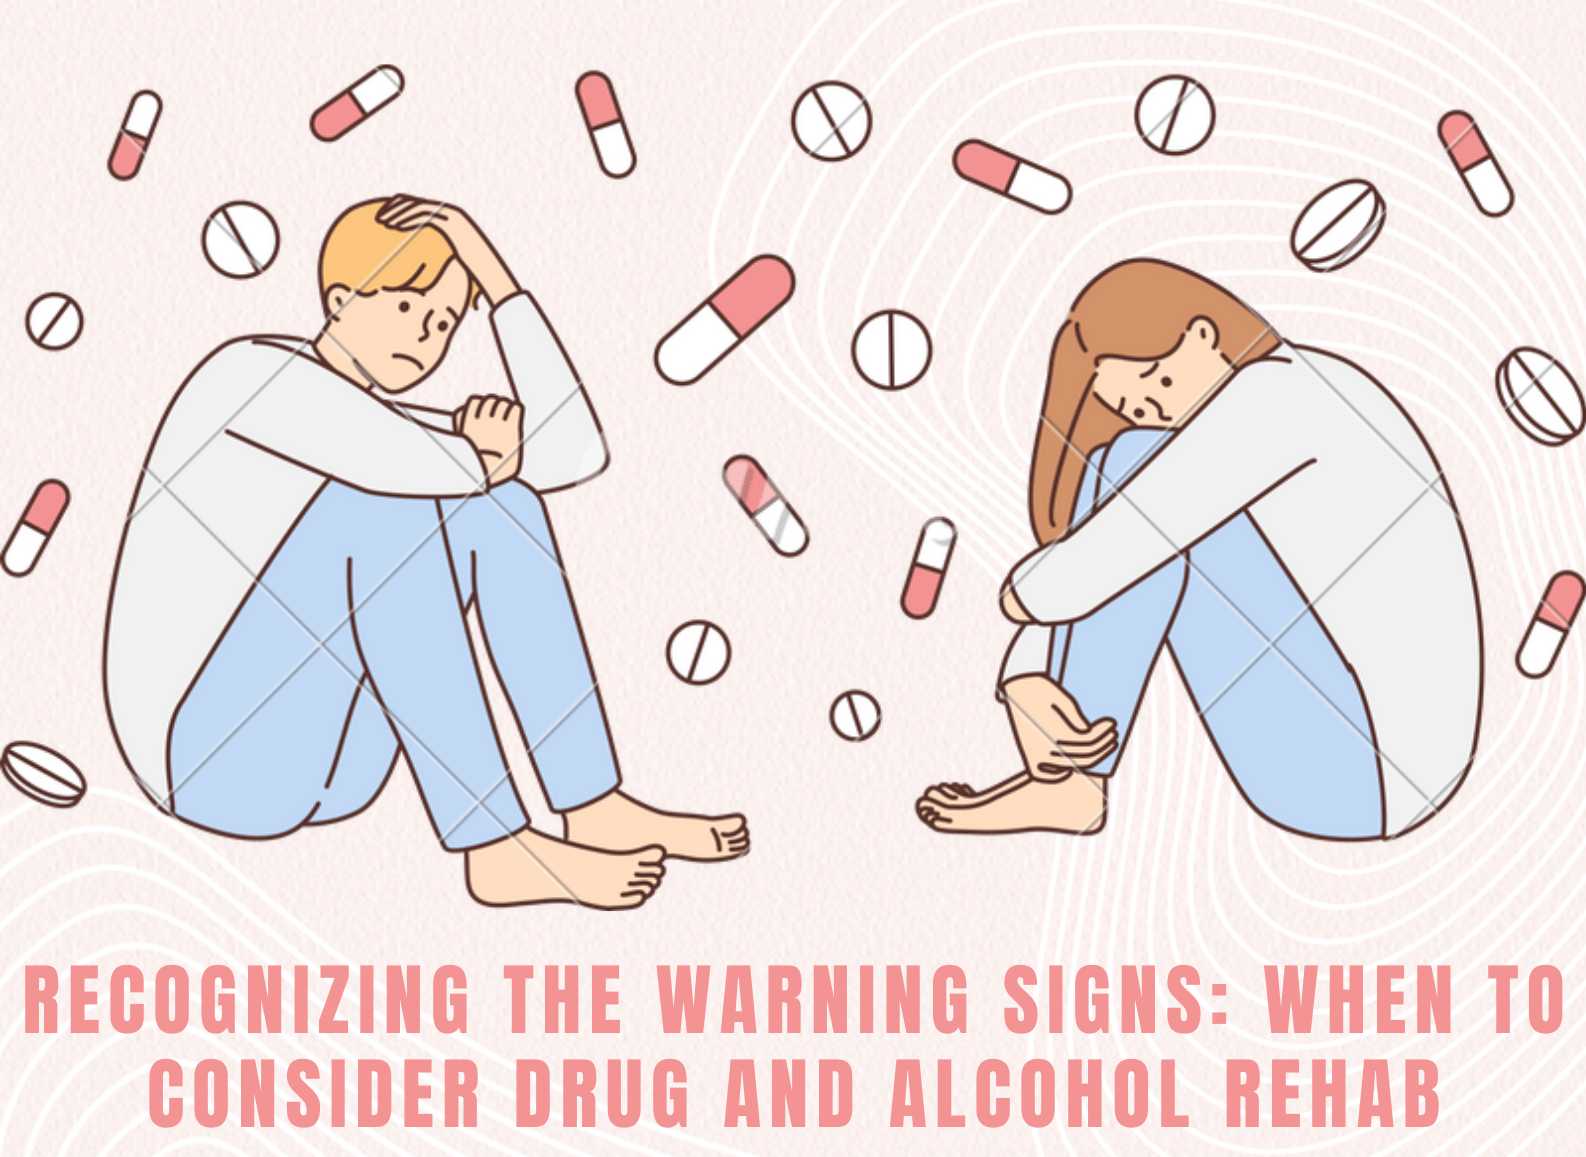 Recognizing the Warning Signs: When to Consider Drug and Alcohol Rehab